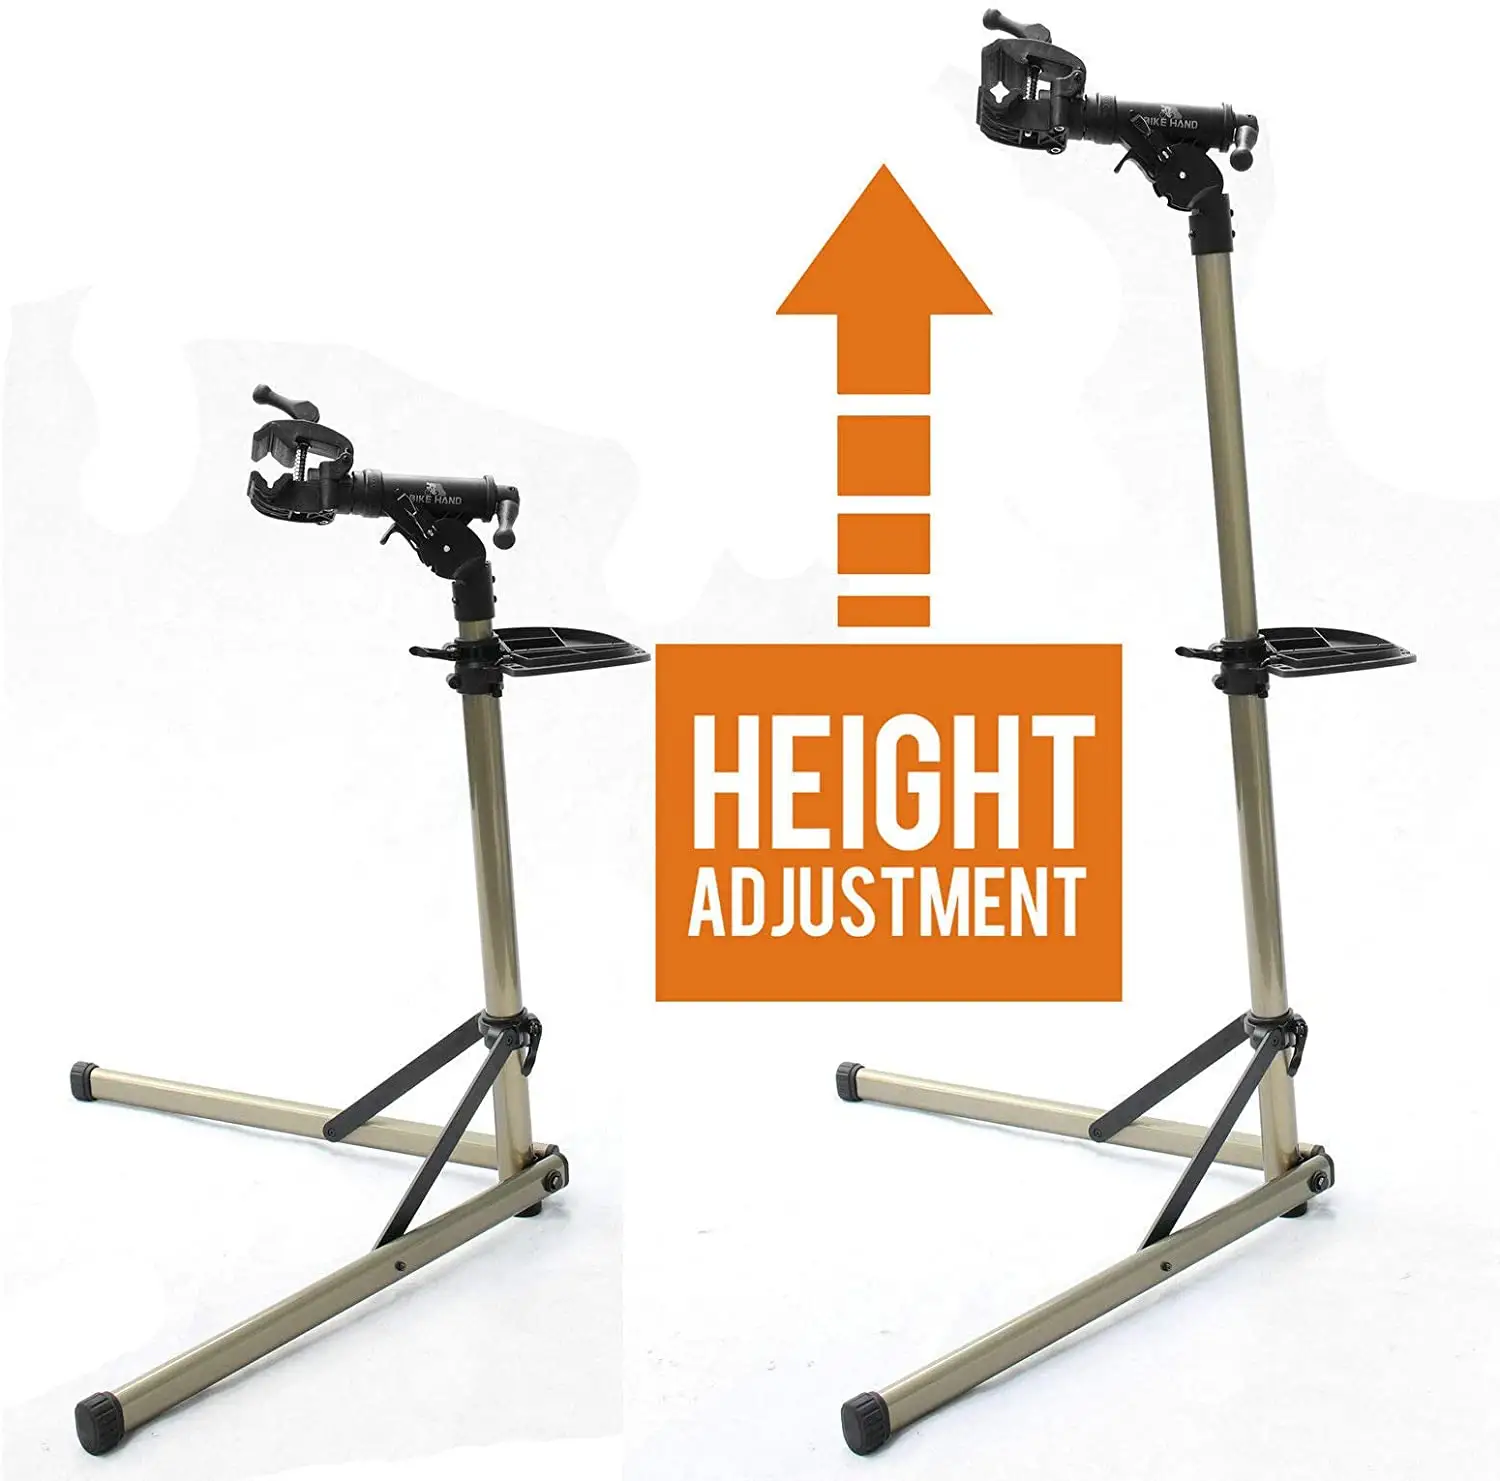 Newly Designed Bicycle Stand Bike Display Stand Portable Parking Rack Bike Repair Stand